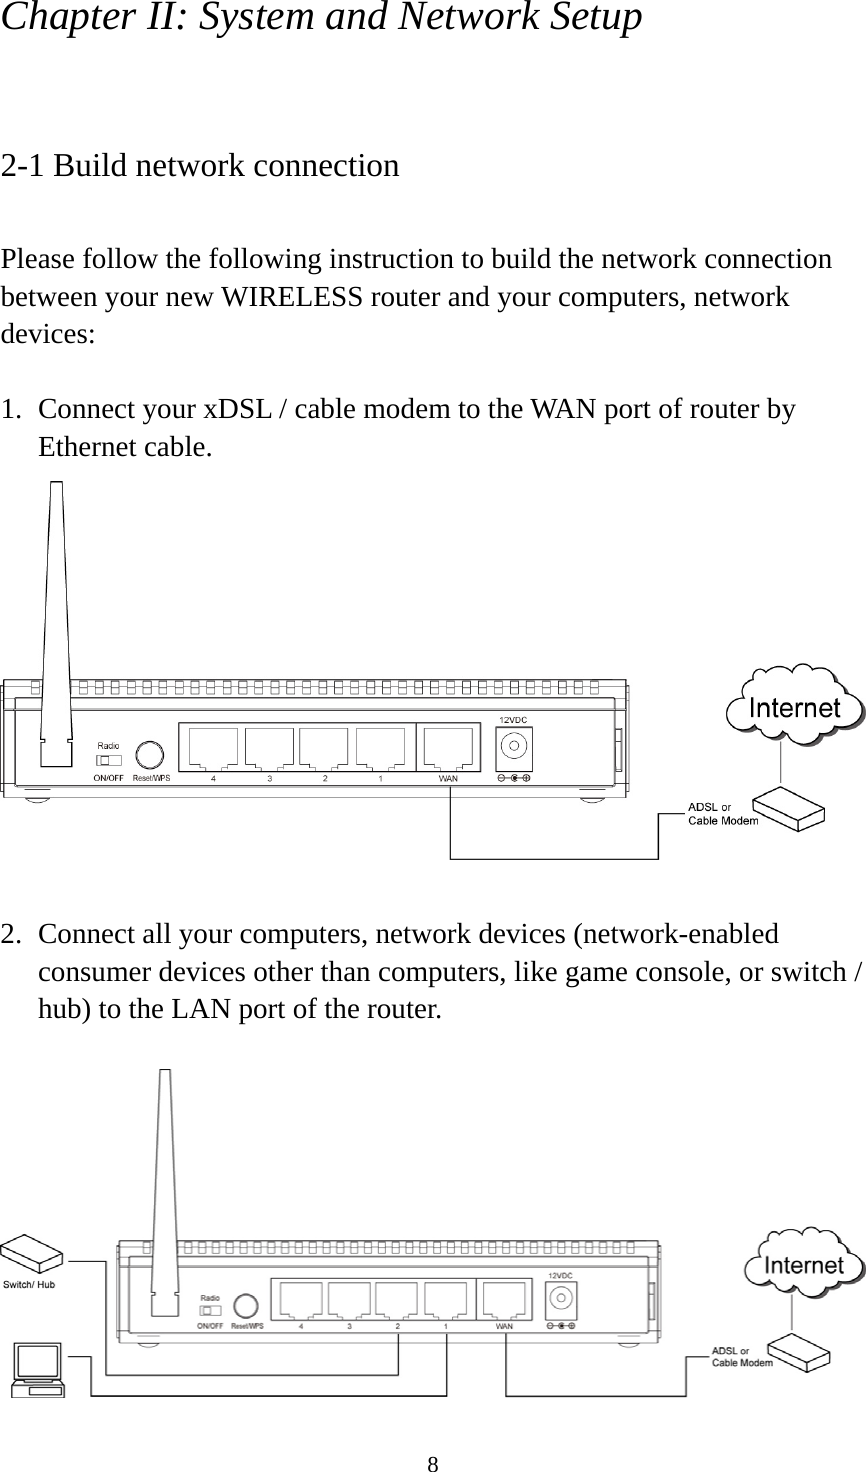 8 Chapter II: System and Network Setup  2-1 Build network connection  Please follow the following instruction to build the network connection between your new WIRELESS router and your computers, network devices:  1. Connect your xDSL / cable modem to the WAN port of router by Ethernet cable.     2. Connect all your computers, network devices (network-enabled consumer devices other than computers, like game console, or switch / hub) to the LAN port of the router.   